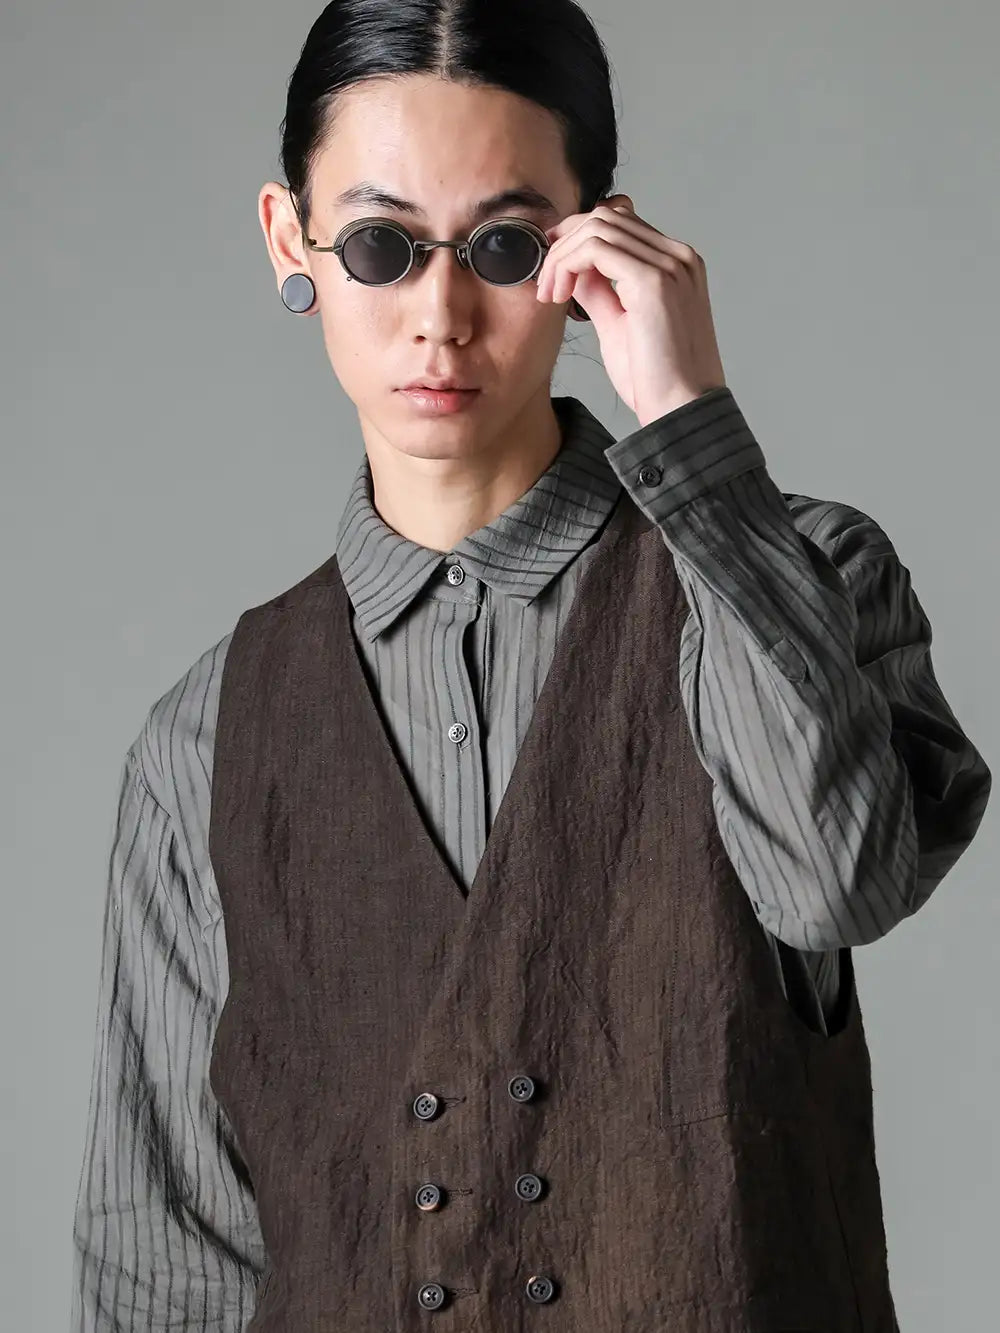 Chiahung Su ZIGGY CHEN 24SS  - Shirts and gilets that are designed to look the way they are supposed to look. - RG1008ZC-VINTAGE OLIVE ZIGGY CHEN x RIGARDS Collaboration RG1008ZC / VINTAGE OLIVE x BRONZE (CLIP) DARK GRAY LENS - 0M2410101 PatchWork Double Breasted Waist Coat - SS24-FS8-COS Asymmetrical Hand Dyed Stripe Shirt 2-002